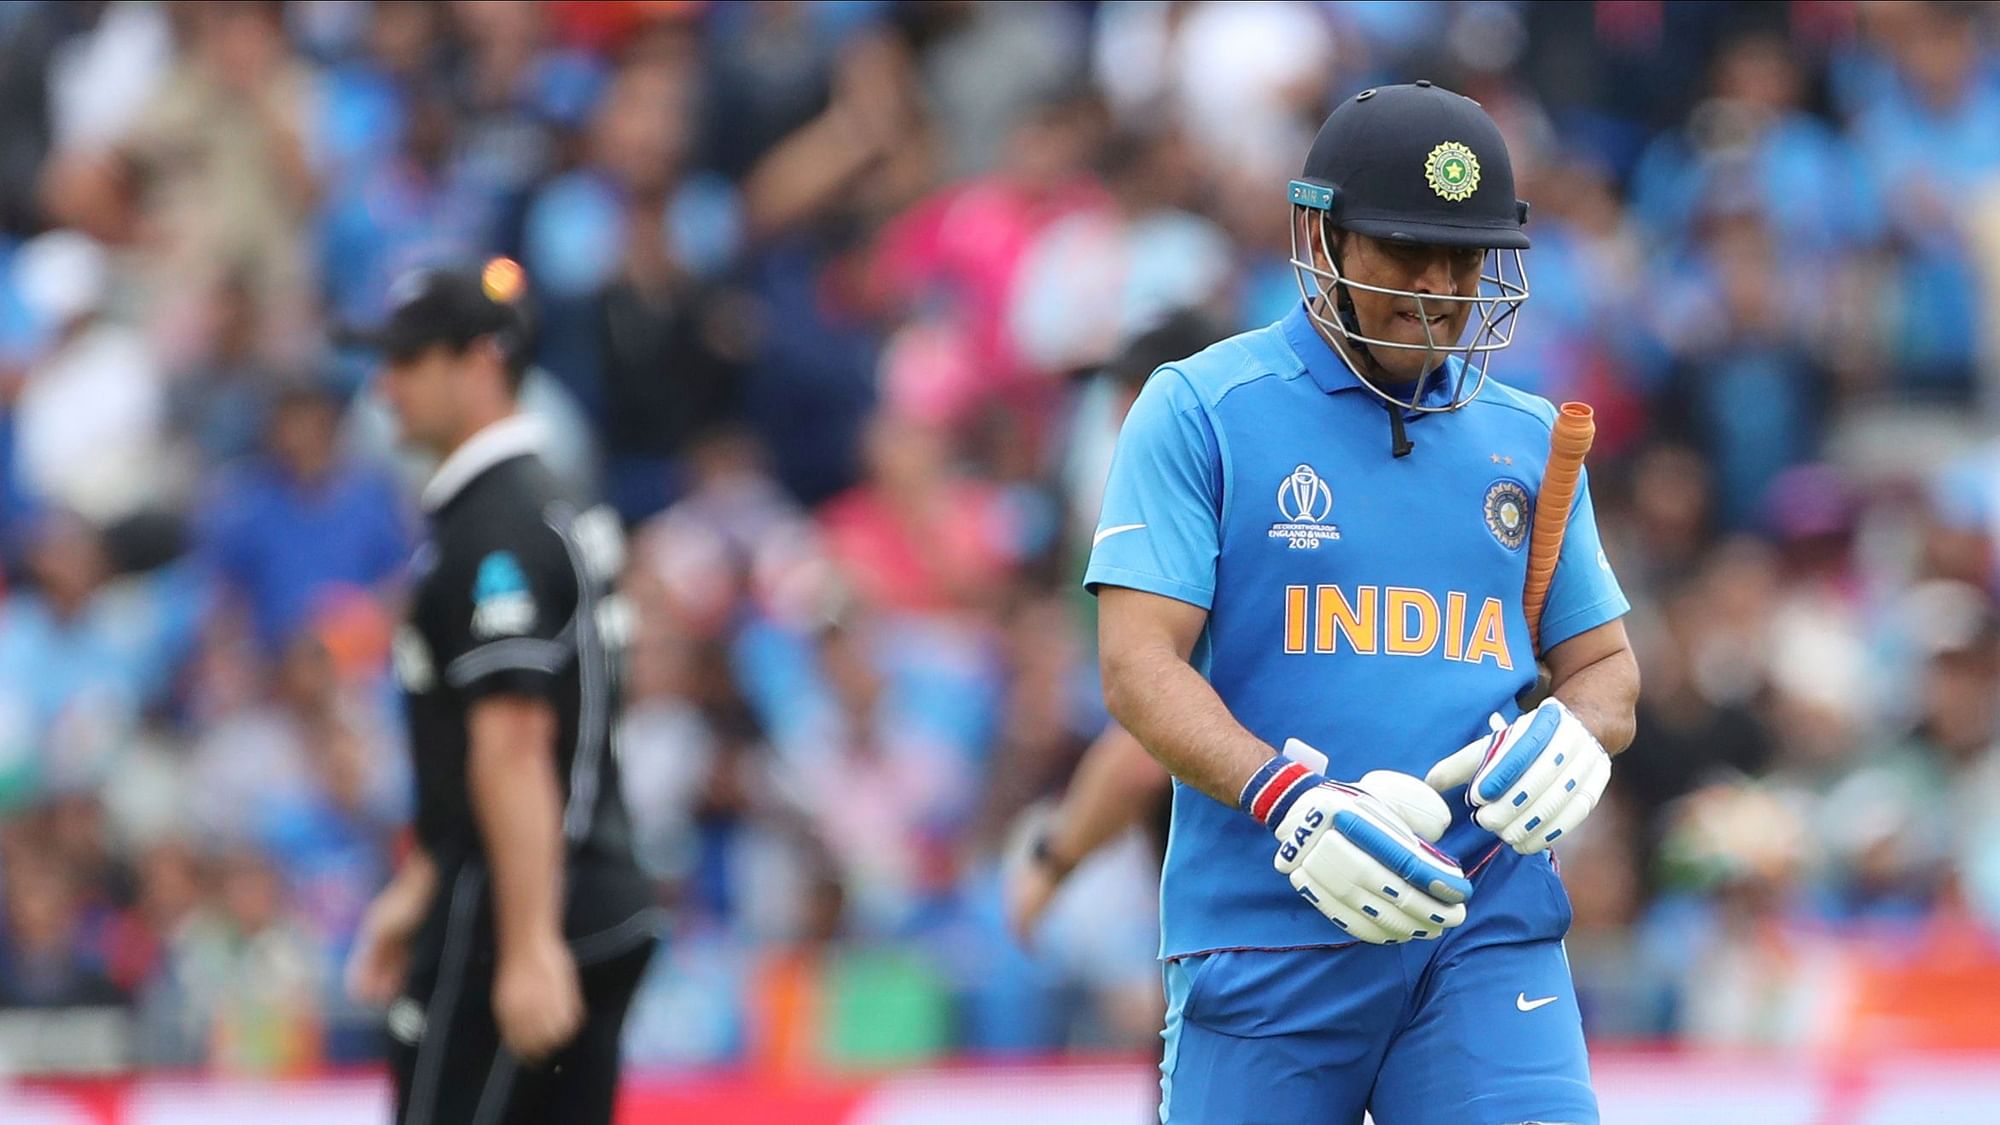 India head coach Ravi Shastri revealed that sending MS Dhoni to bat at No. 7 in their 18-run World Cup semi-final loss to New Zealand was a team decision.